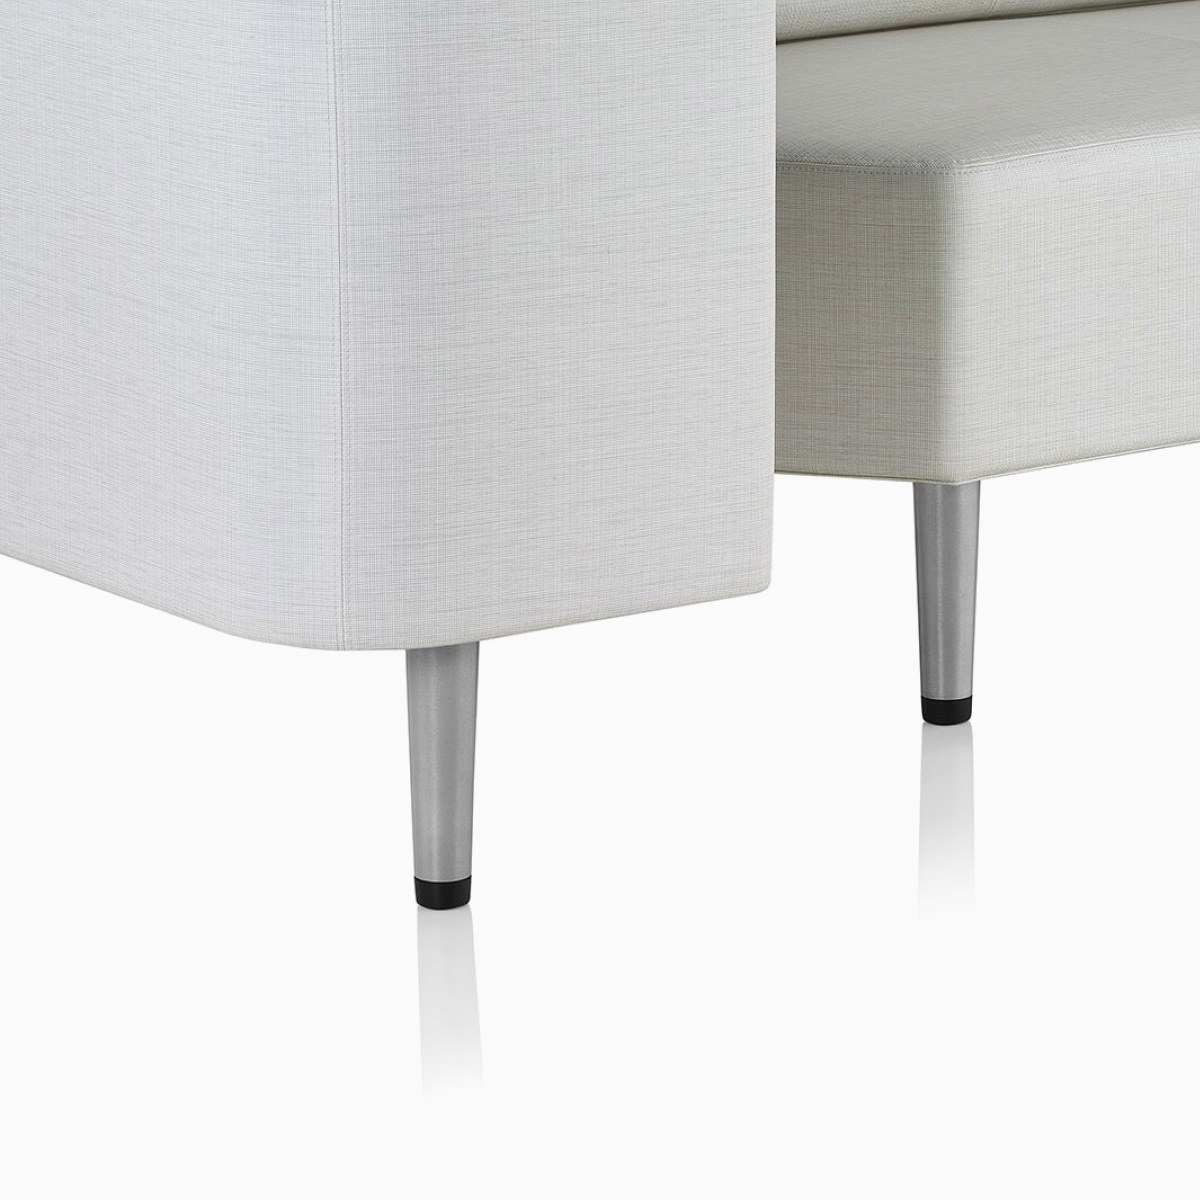 Detail of the glides on the legs of a Nemschoff Palisade Flop Sofa.